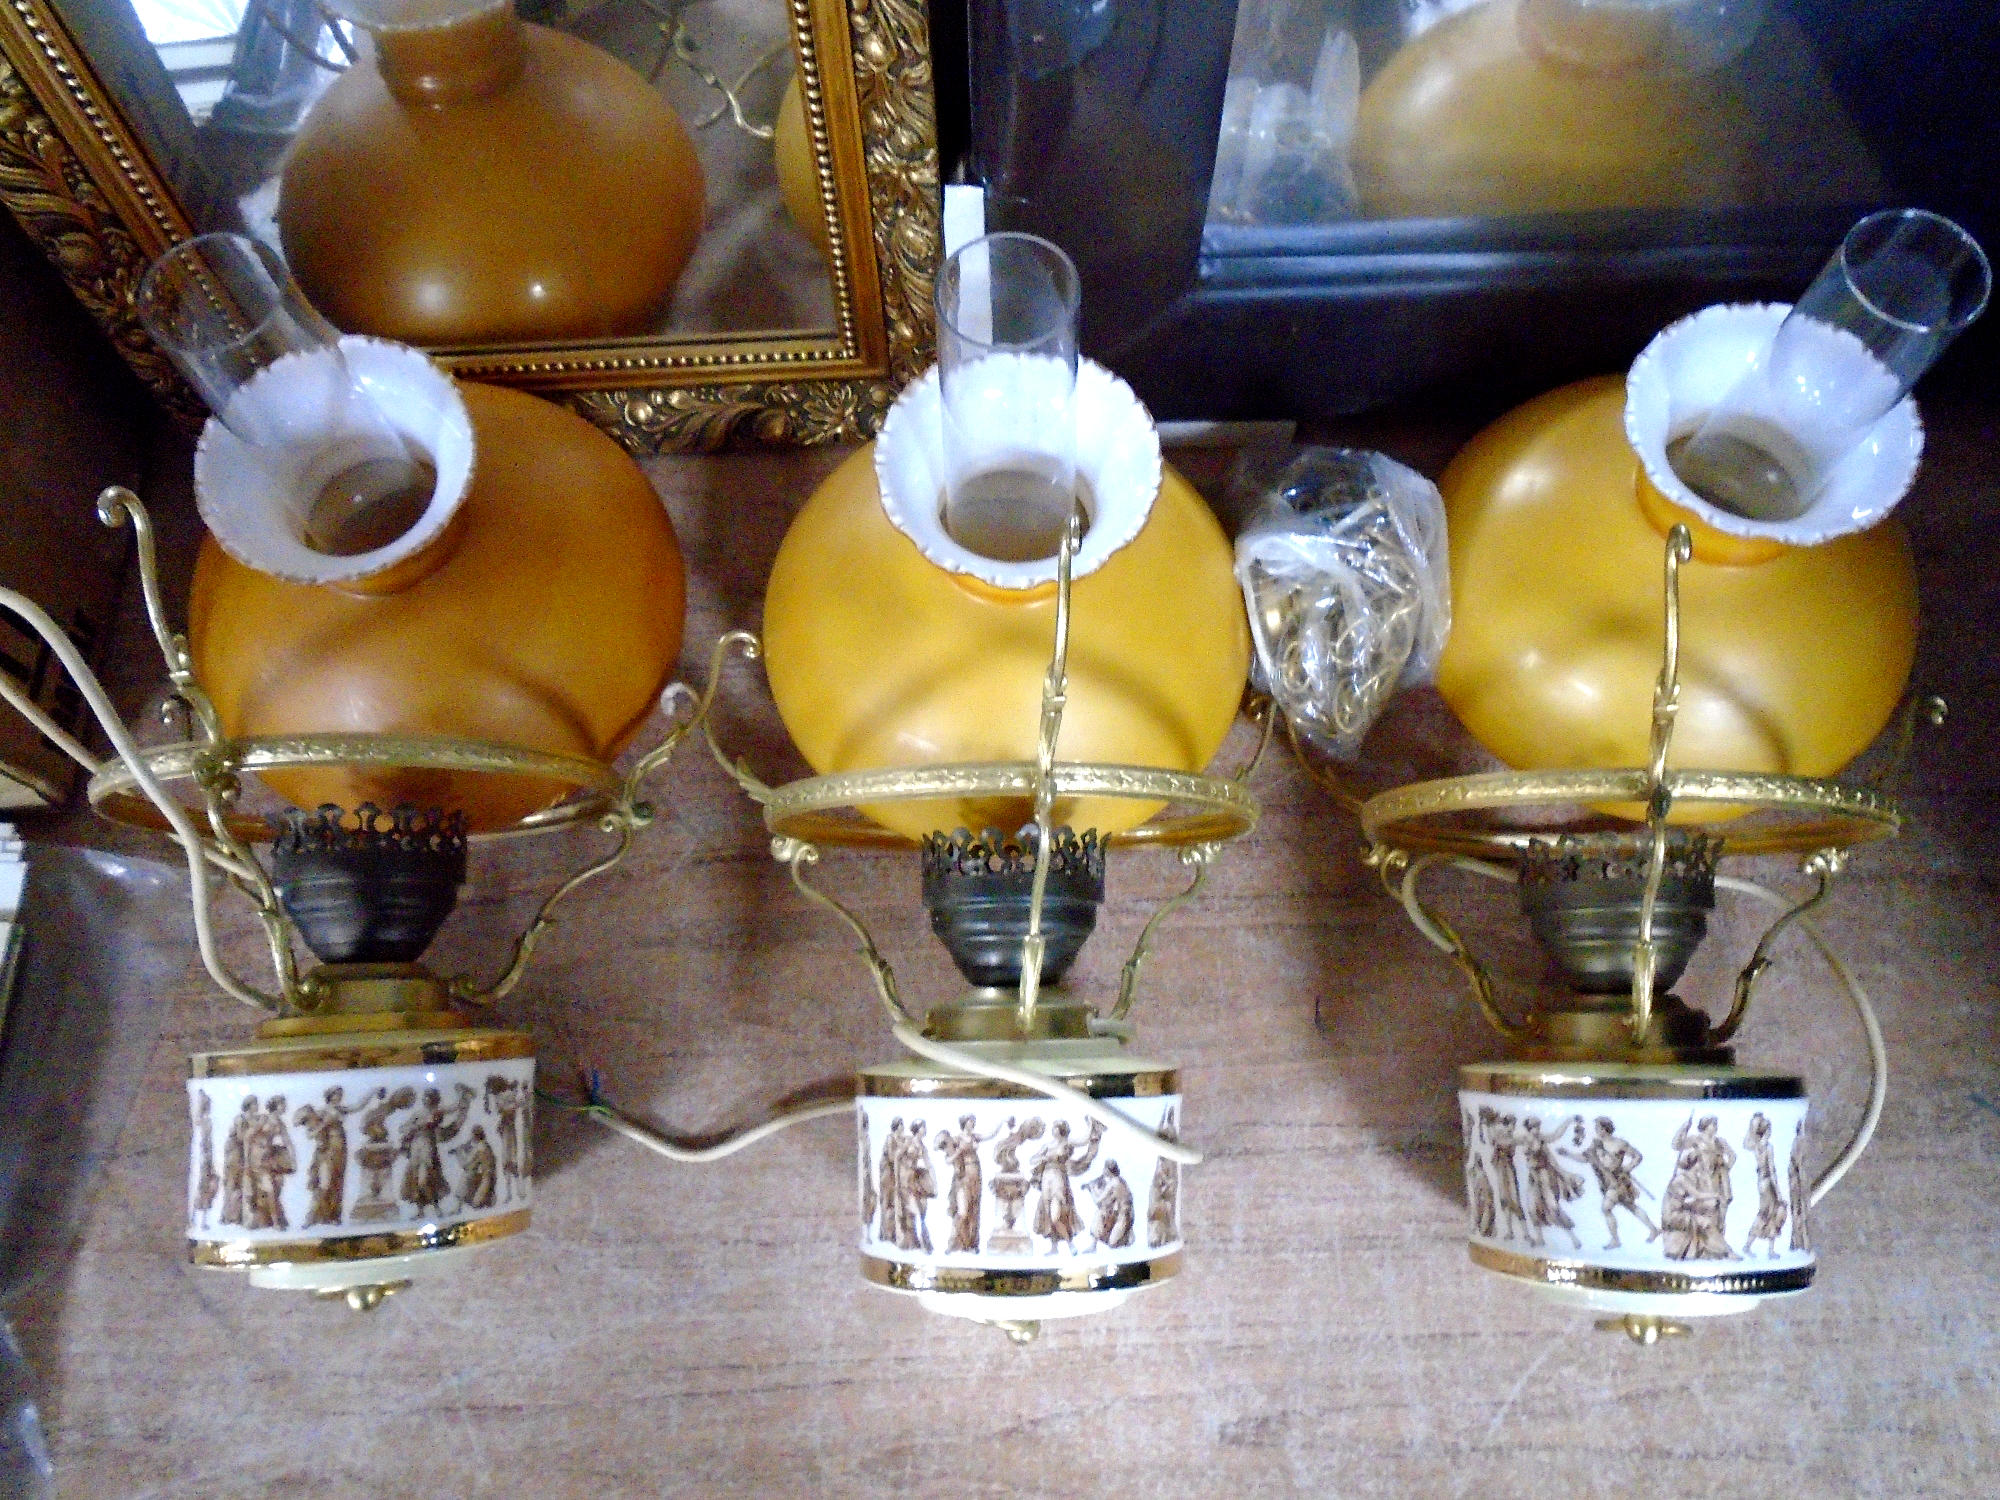 Three ceramic hanging oil lamps with amber shades and chimneys depicting Grecian figures.